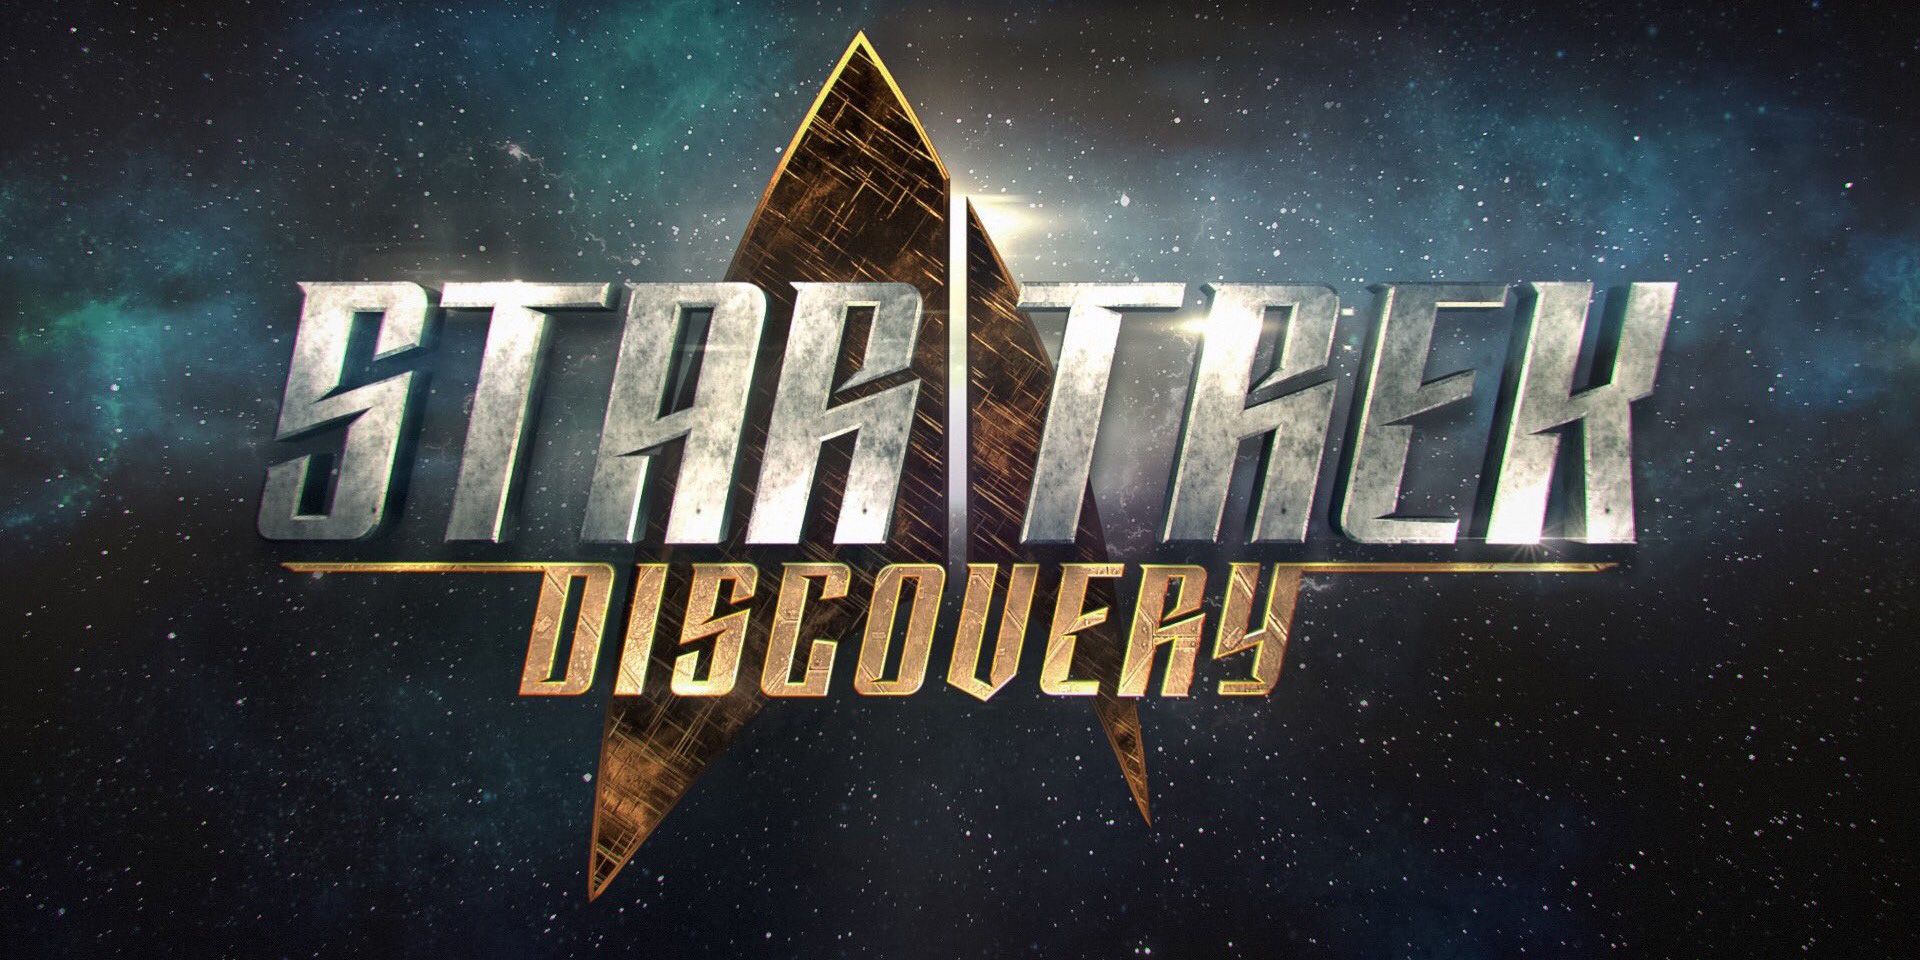 Star Trek: Discovery Video Confirms Start of Filming